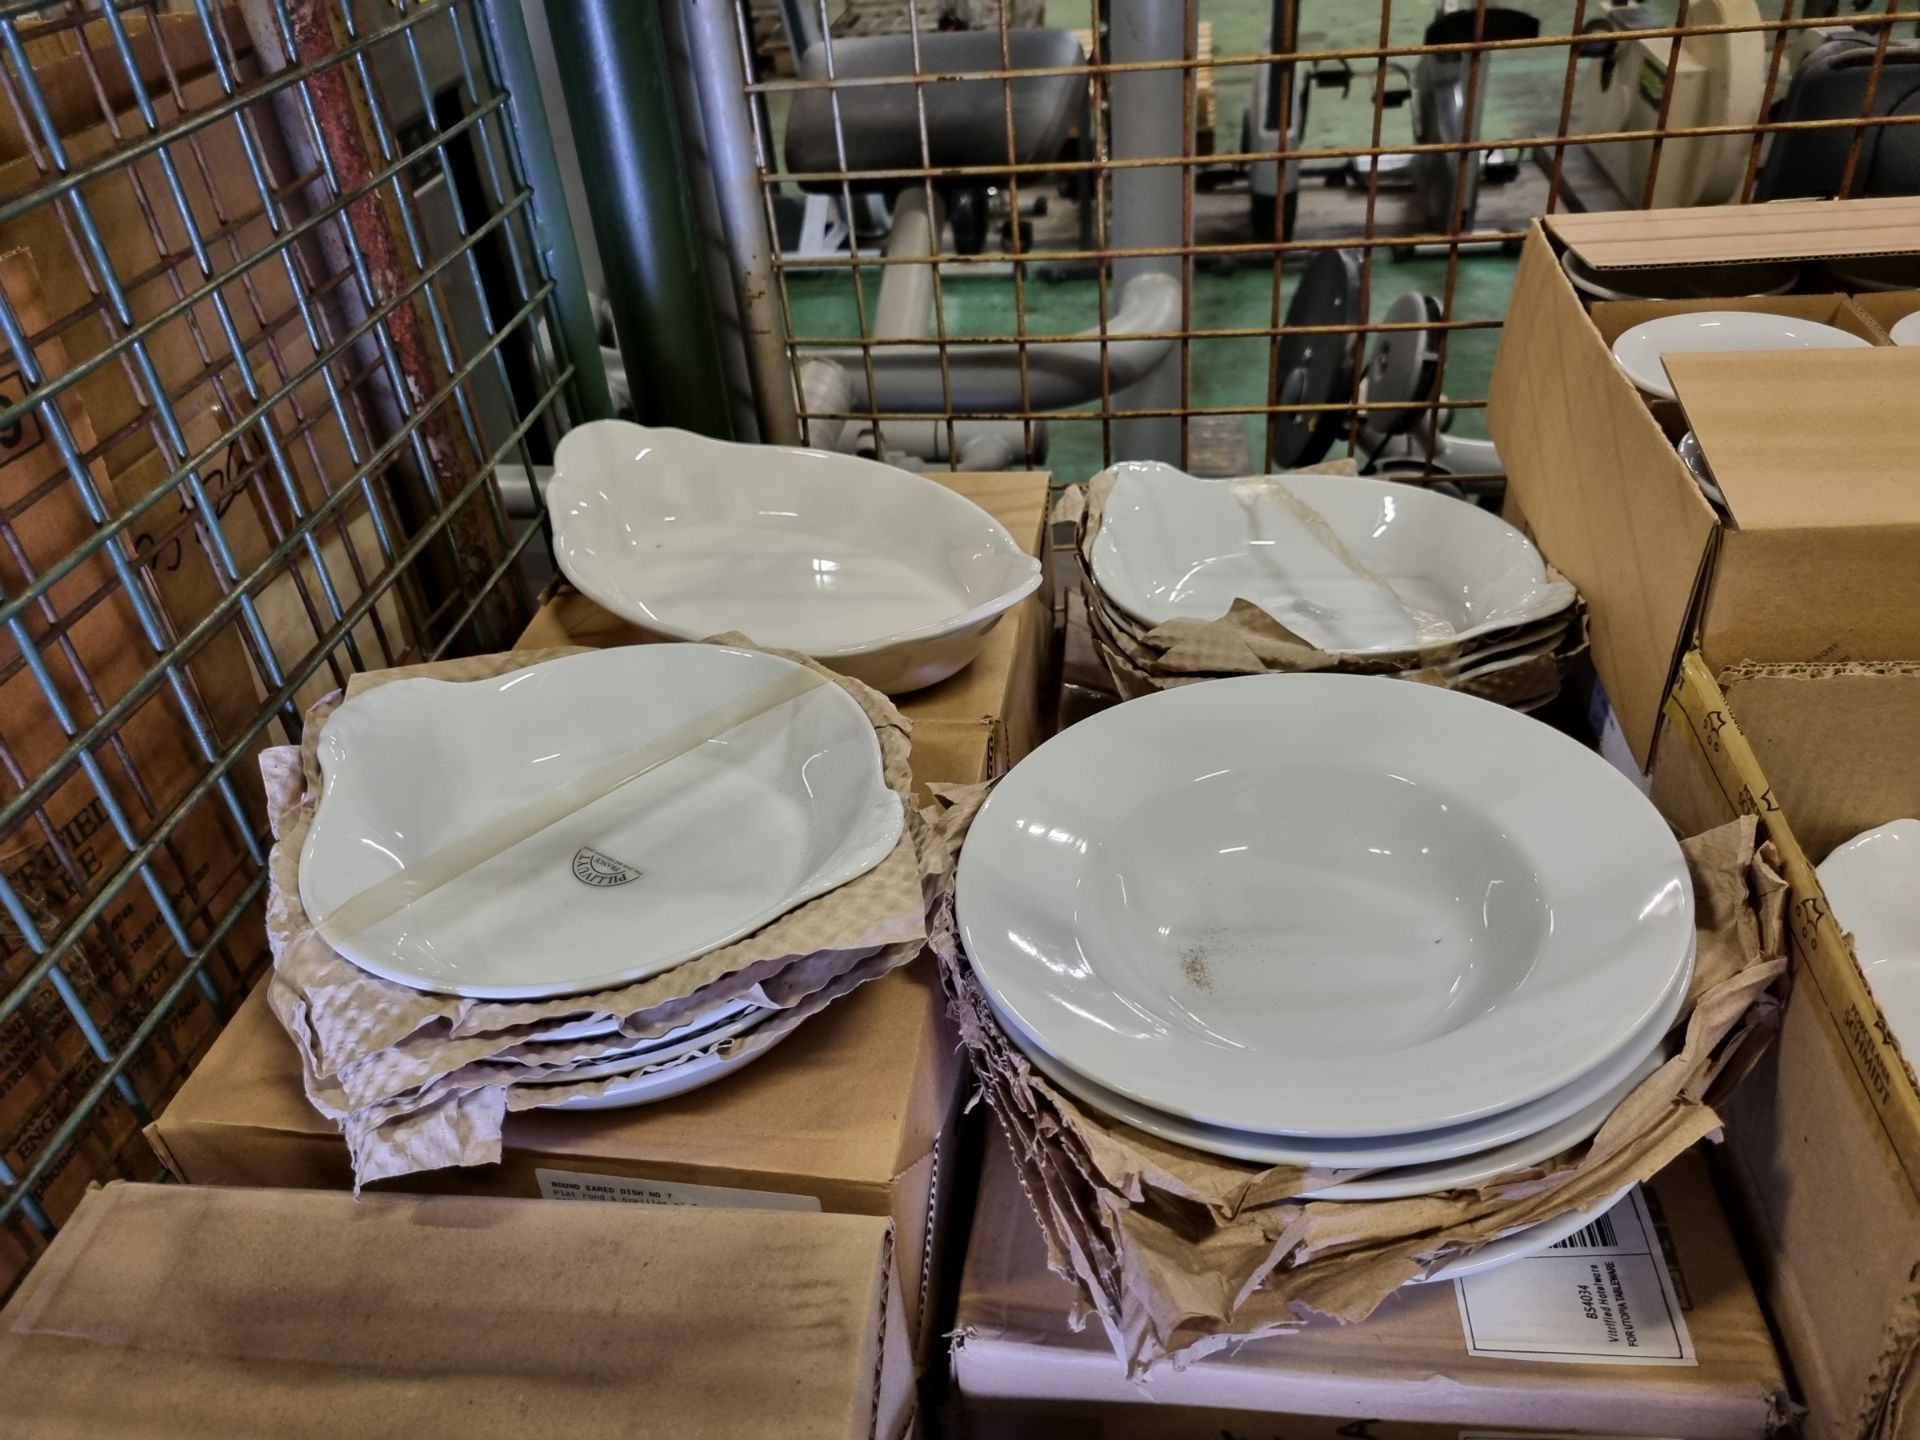 Catering Equipment - White large plates, side plate, saucers, bowls, dishes - Image 3 of 8